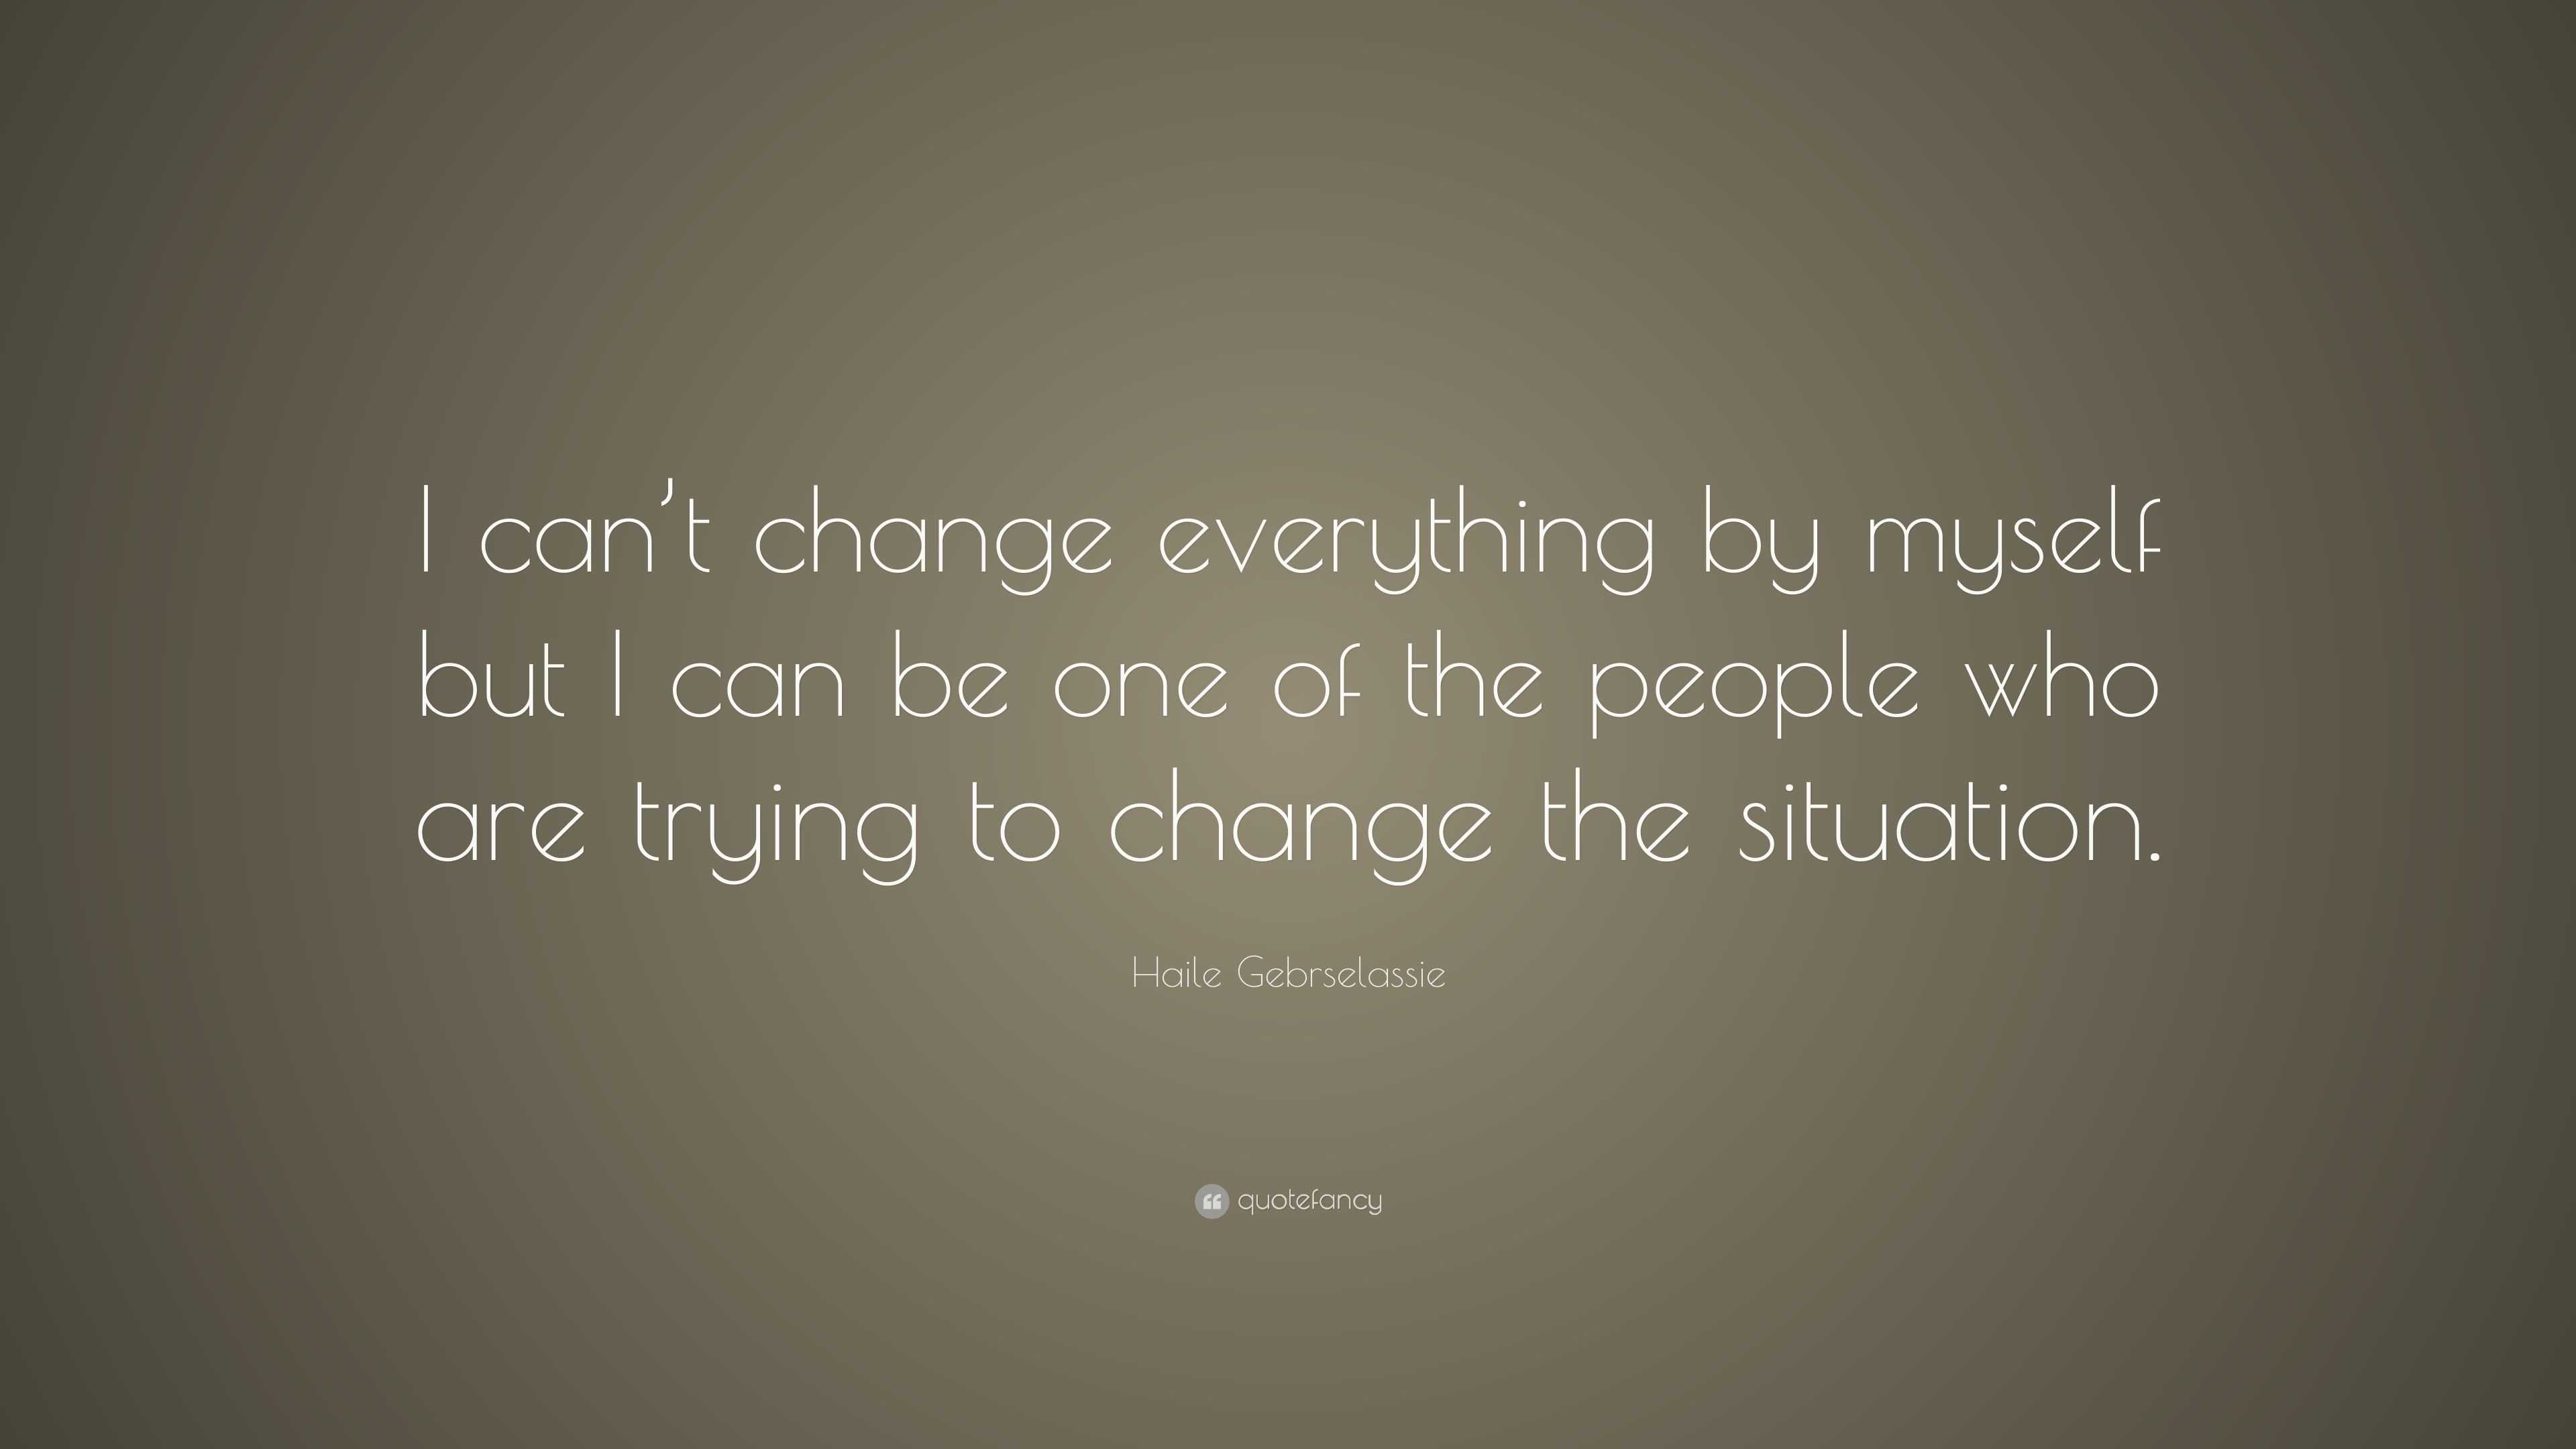 Haile Gebrselassie Quote: “I can’t change everything by myself but I ...